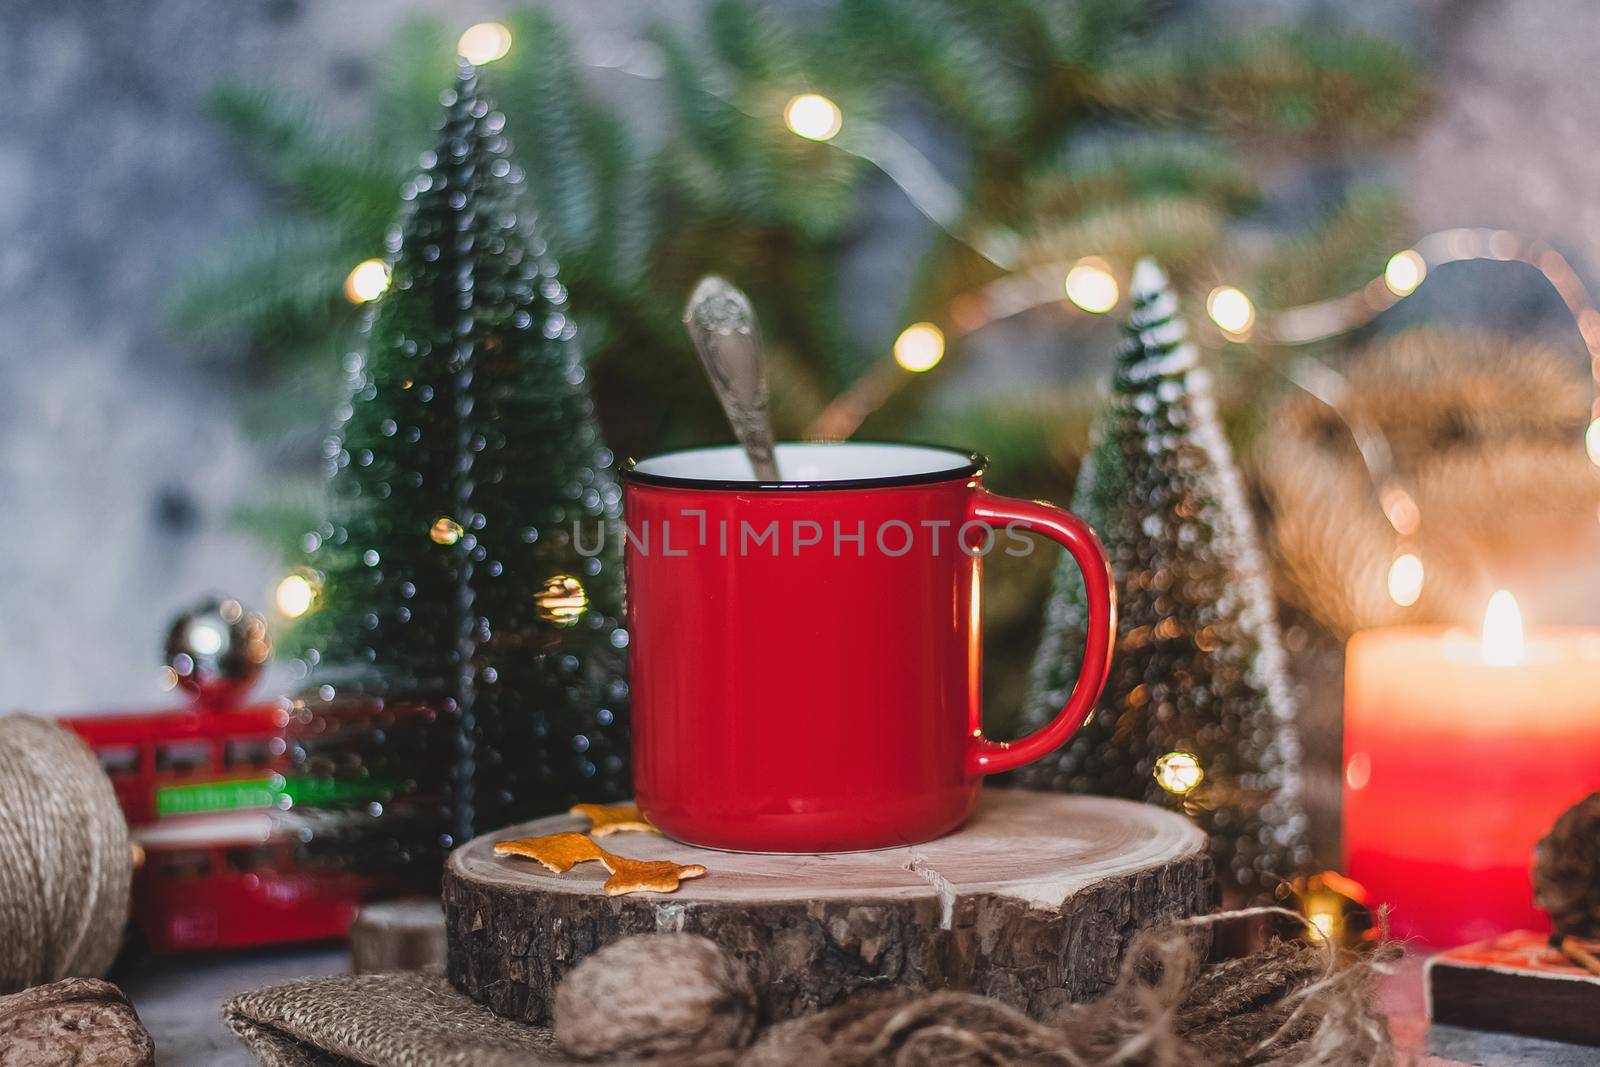 Cozy winter drink hot chocolate cocoa in red mug with fir tree, candles and Christmas lights. by mmp1206